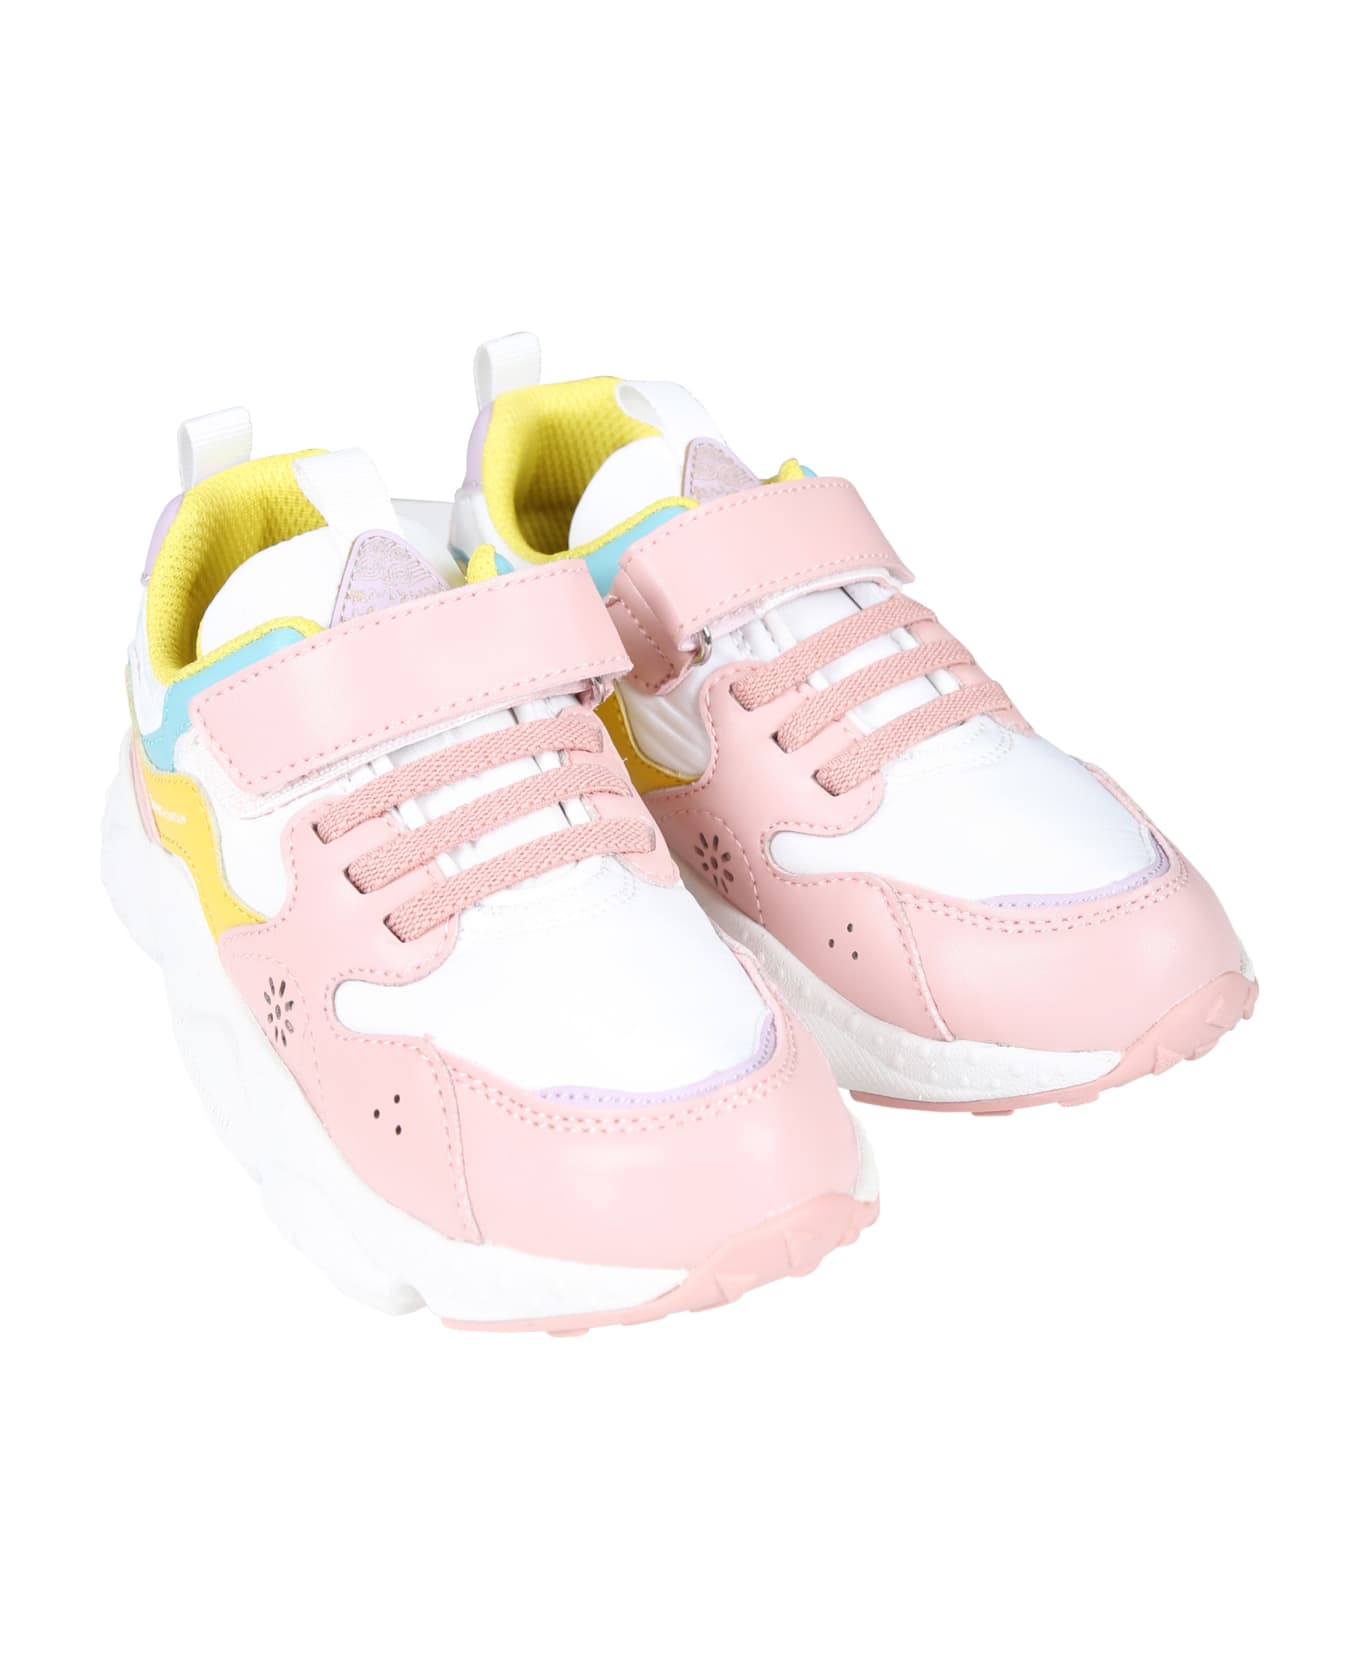 Flower Mountain Pink Yamano Low Sneakers For Girl - Pink